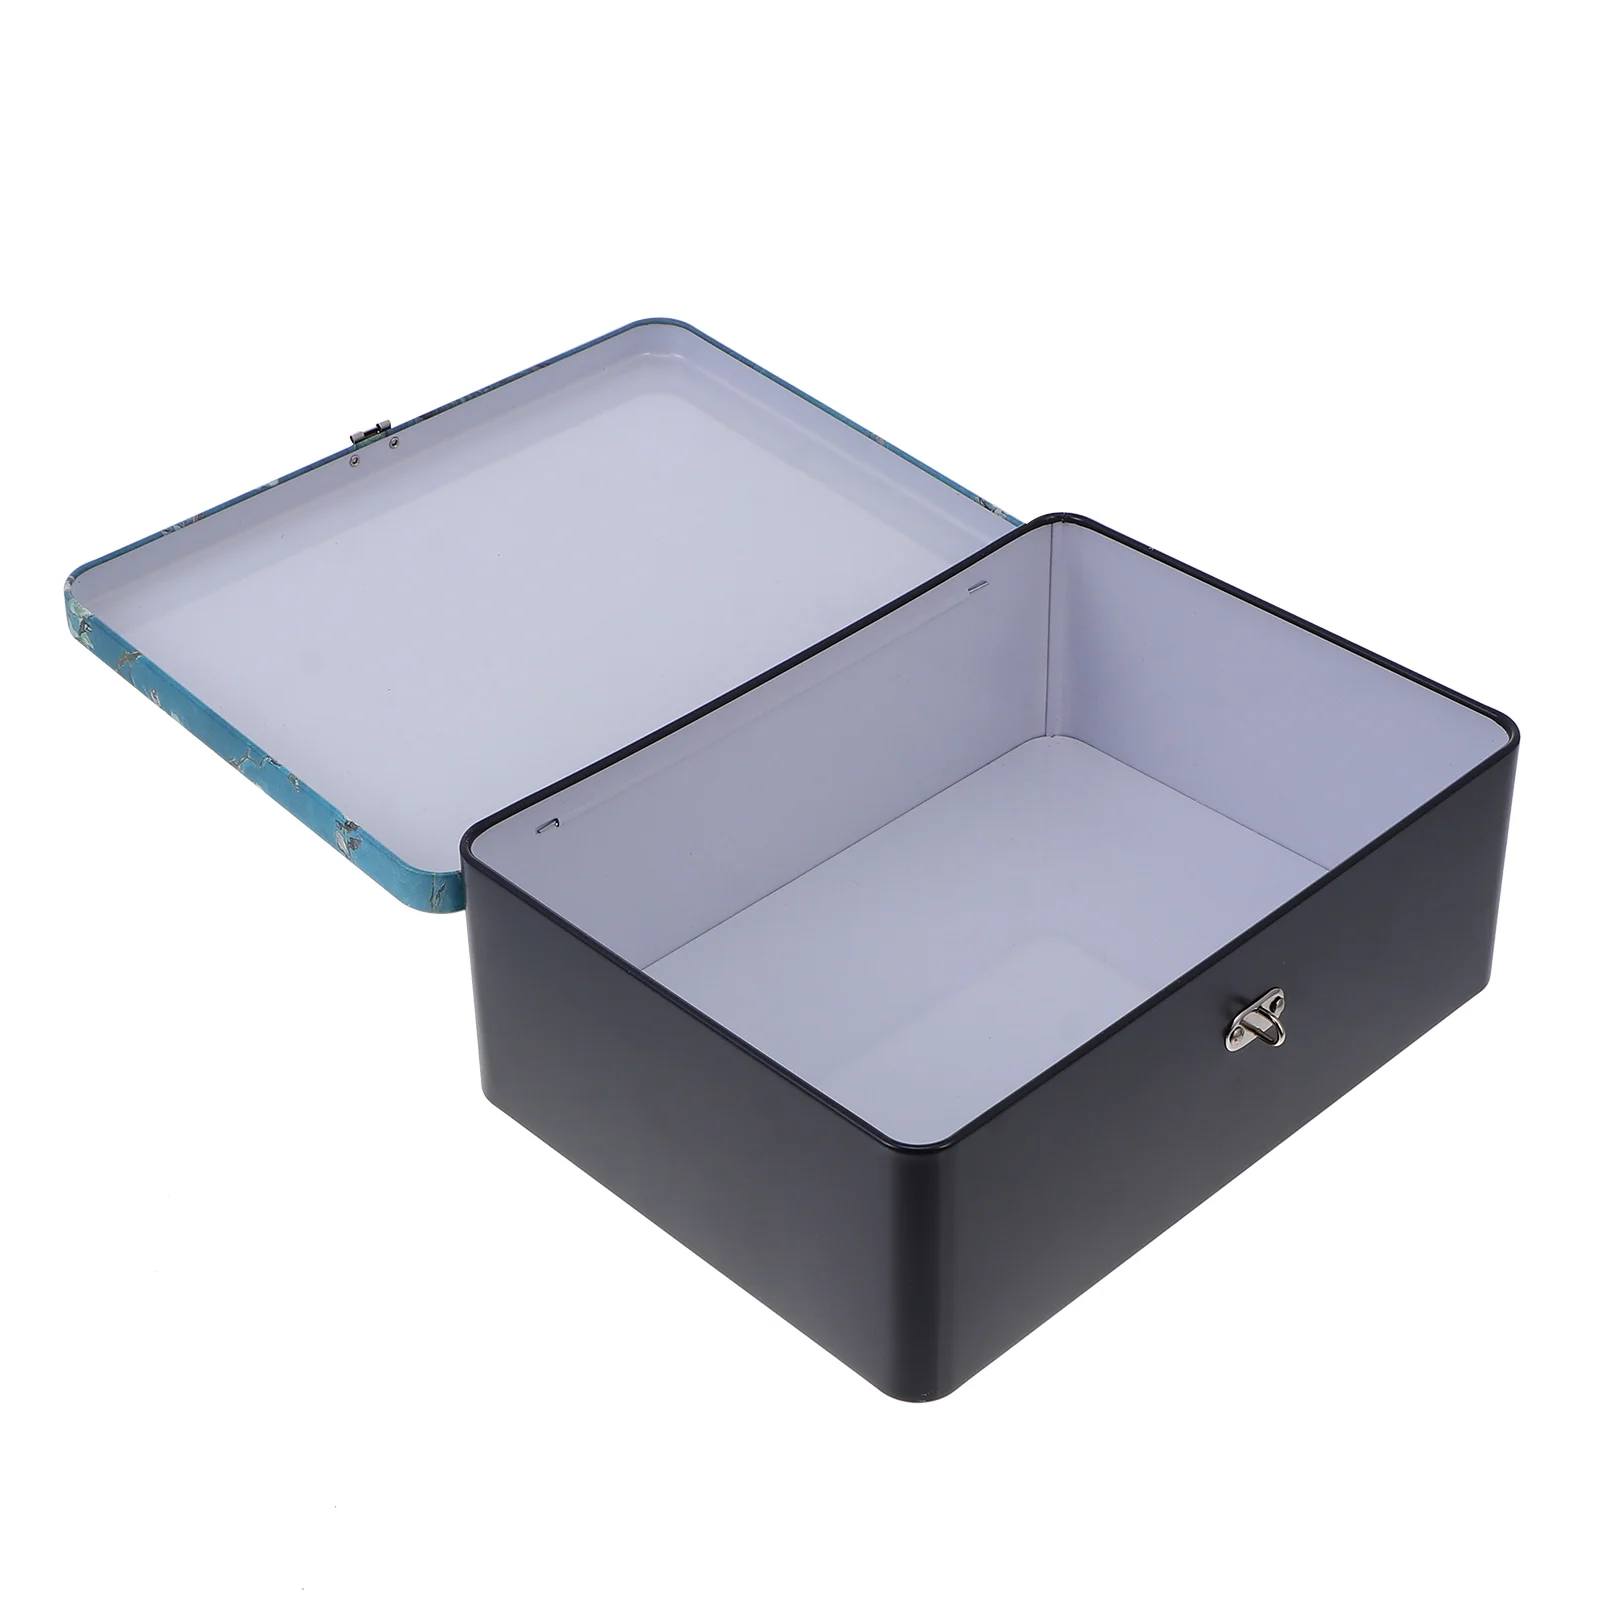 

Square Containers Lids Tinplate Box Lock Kitchen Storage Organizer Canister Gift Case Packaging Travel With padlock